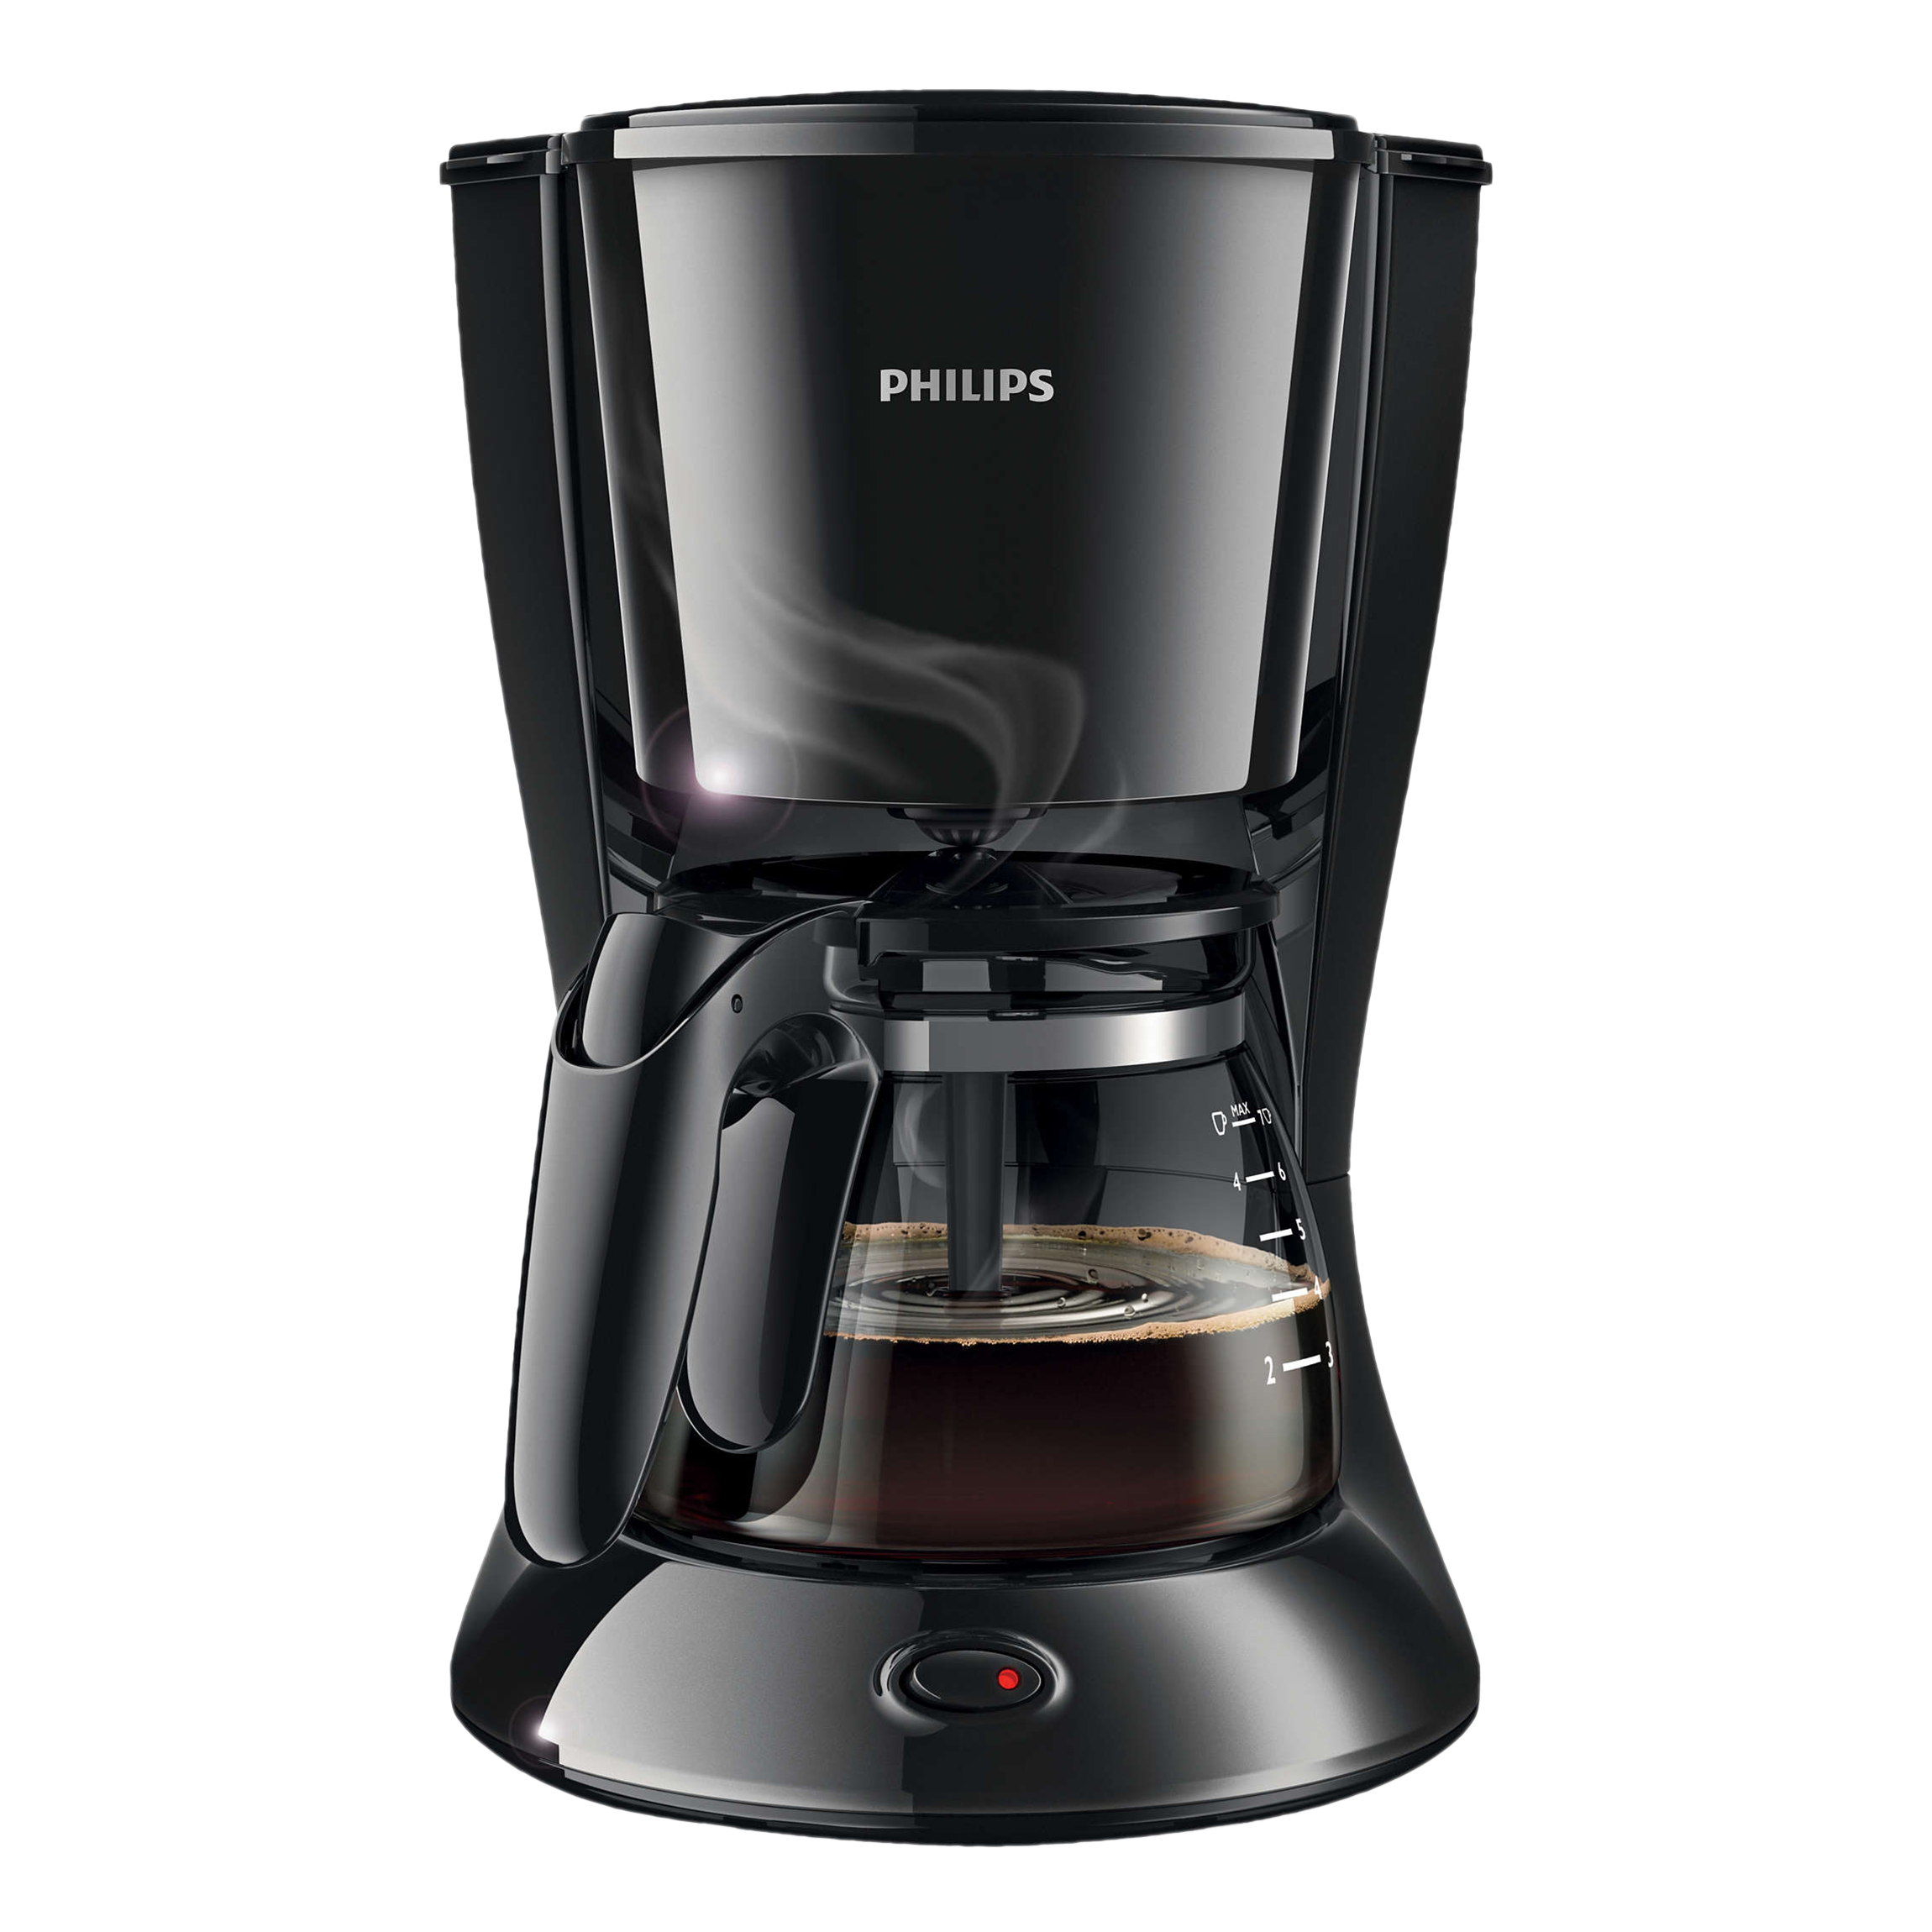 philips - Philip Daily Collection 2-7 Cups Fully Automatic Coffee Maker (HD7432/20, Black)